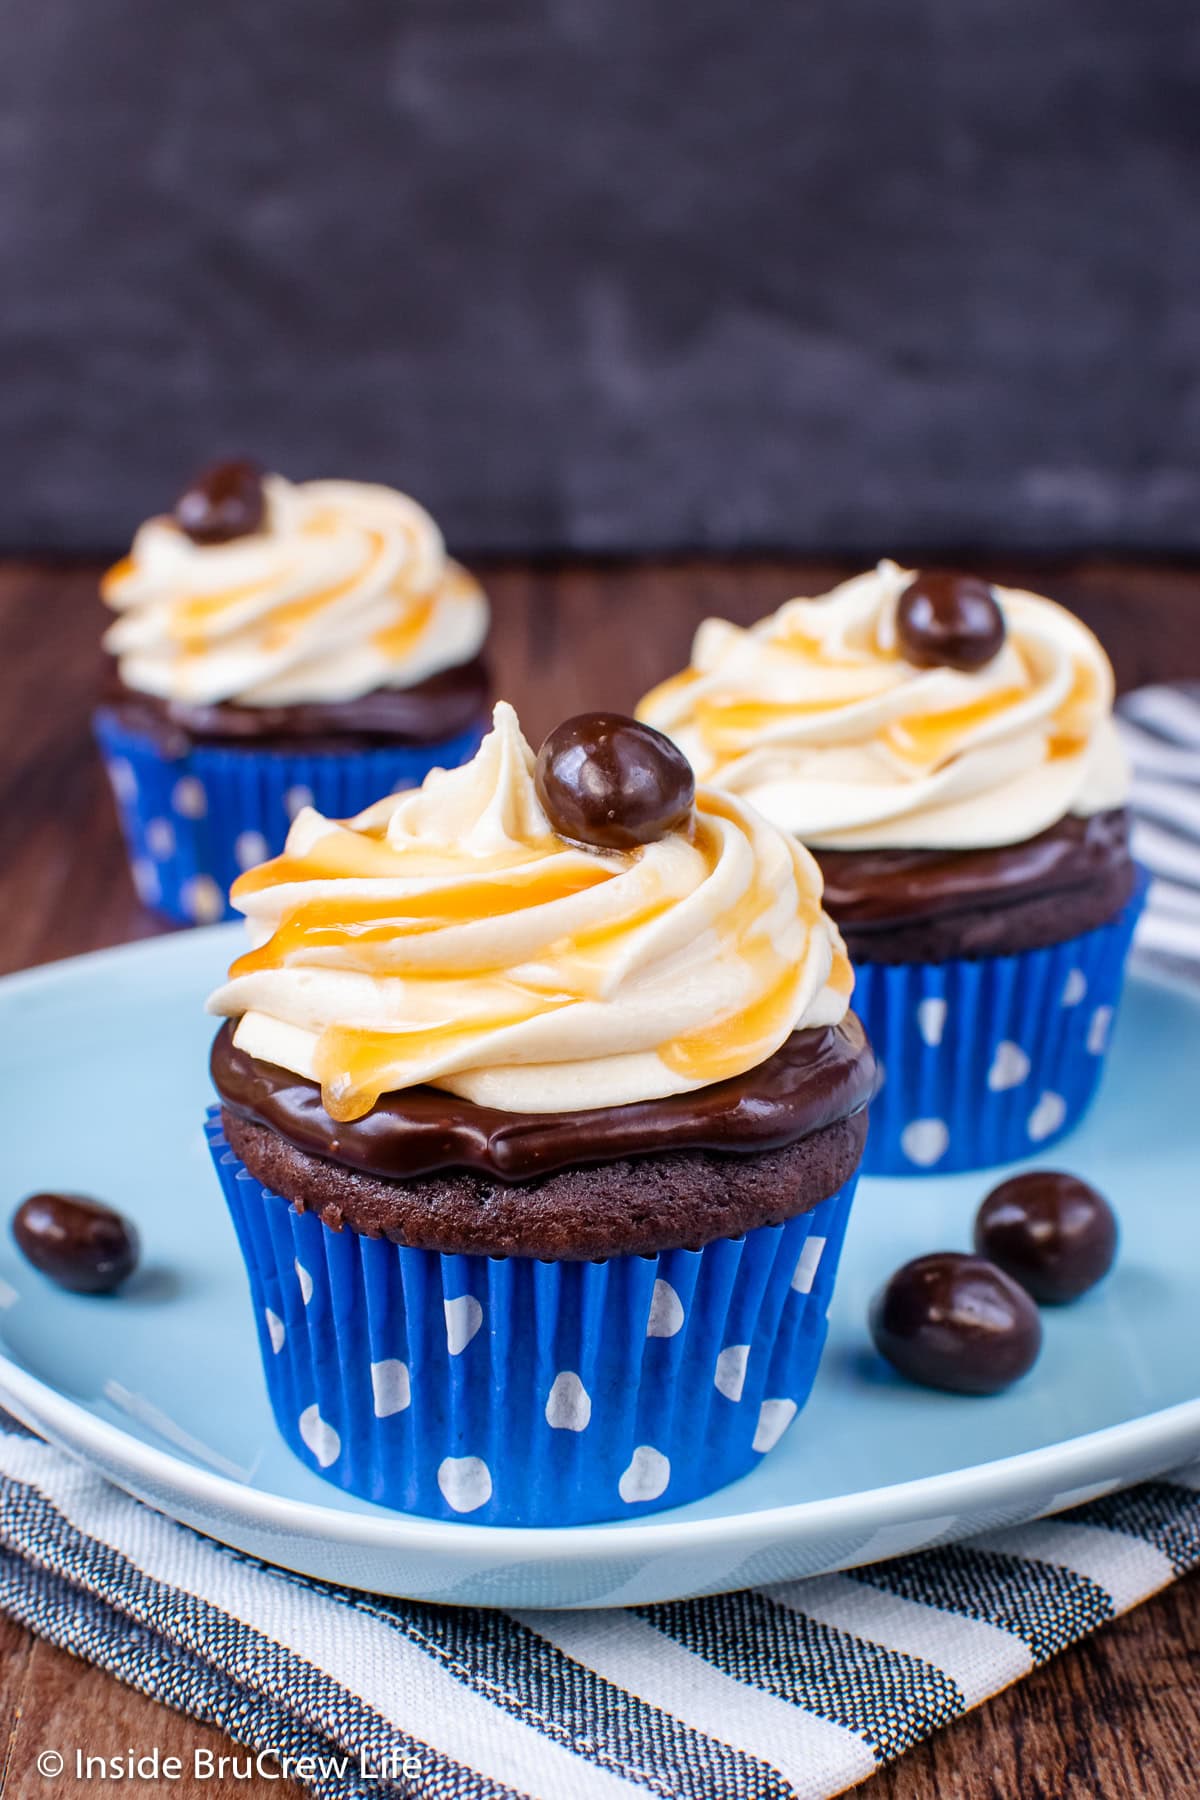 Three chocolate cupcakes with caramel frosting on a plate.